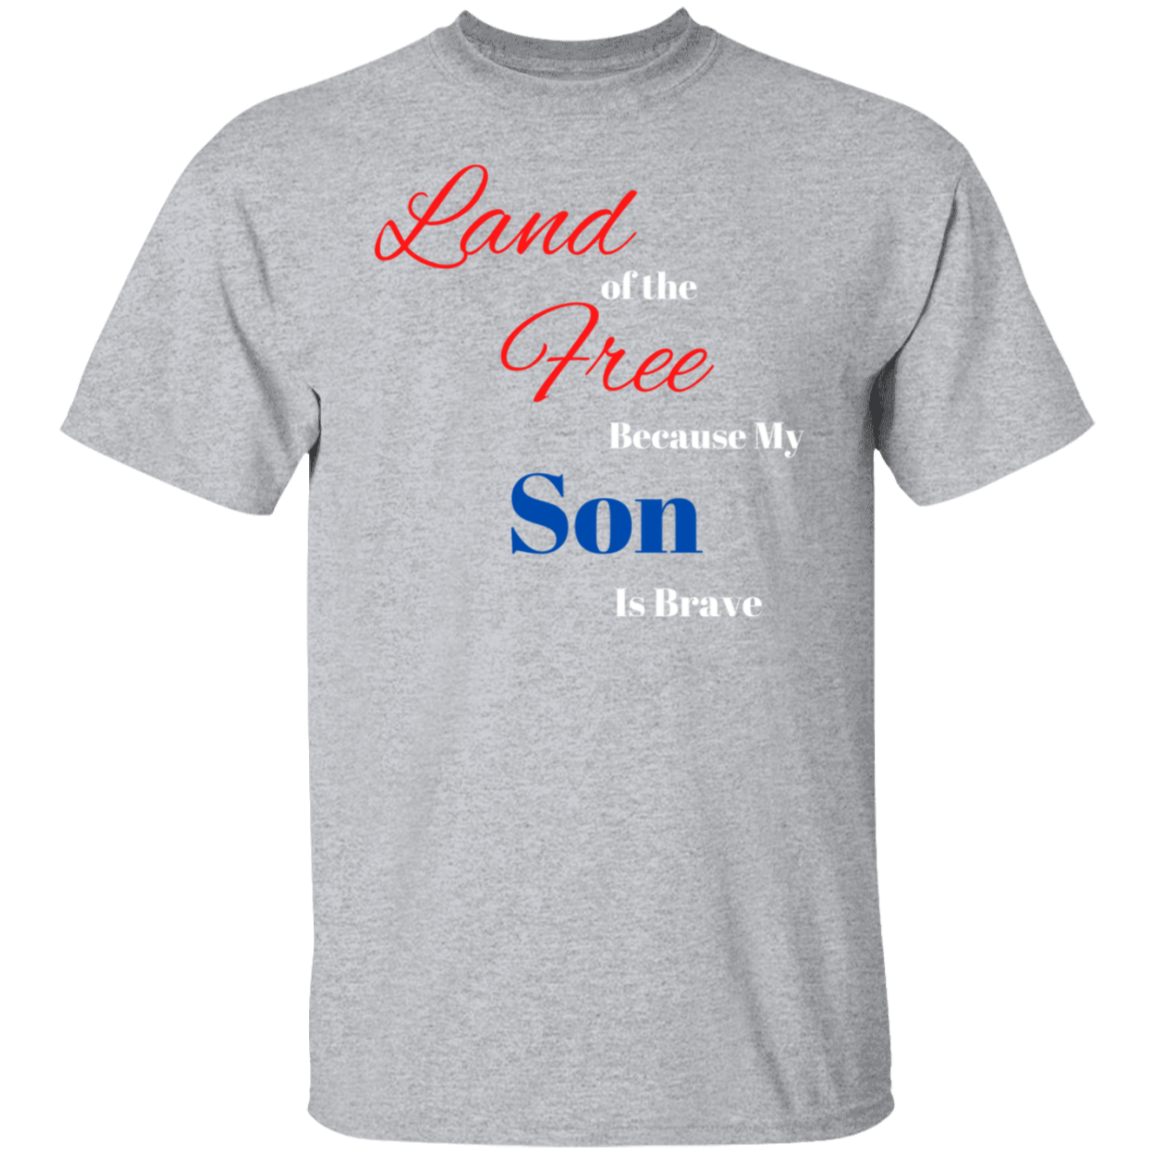 Land of the Free | Son T-Shirt